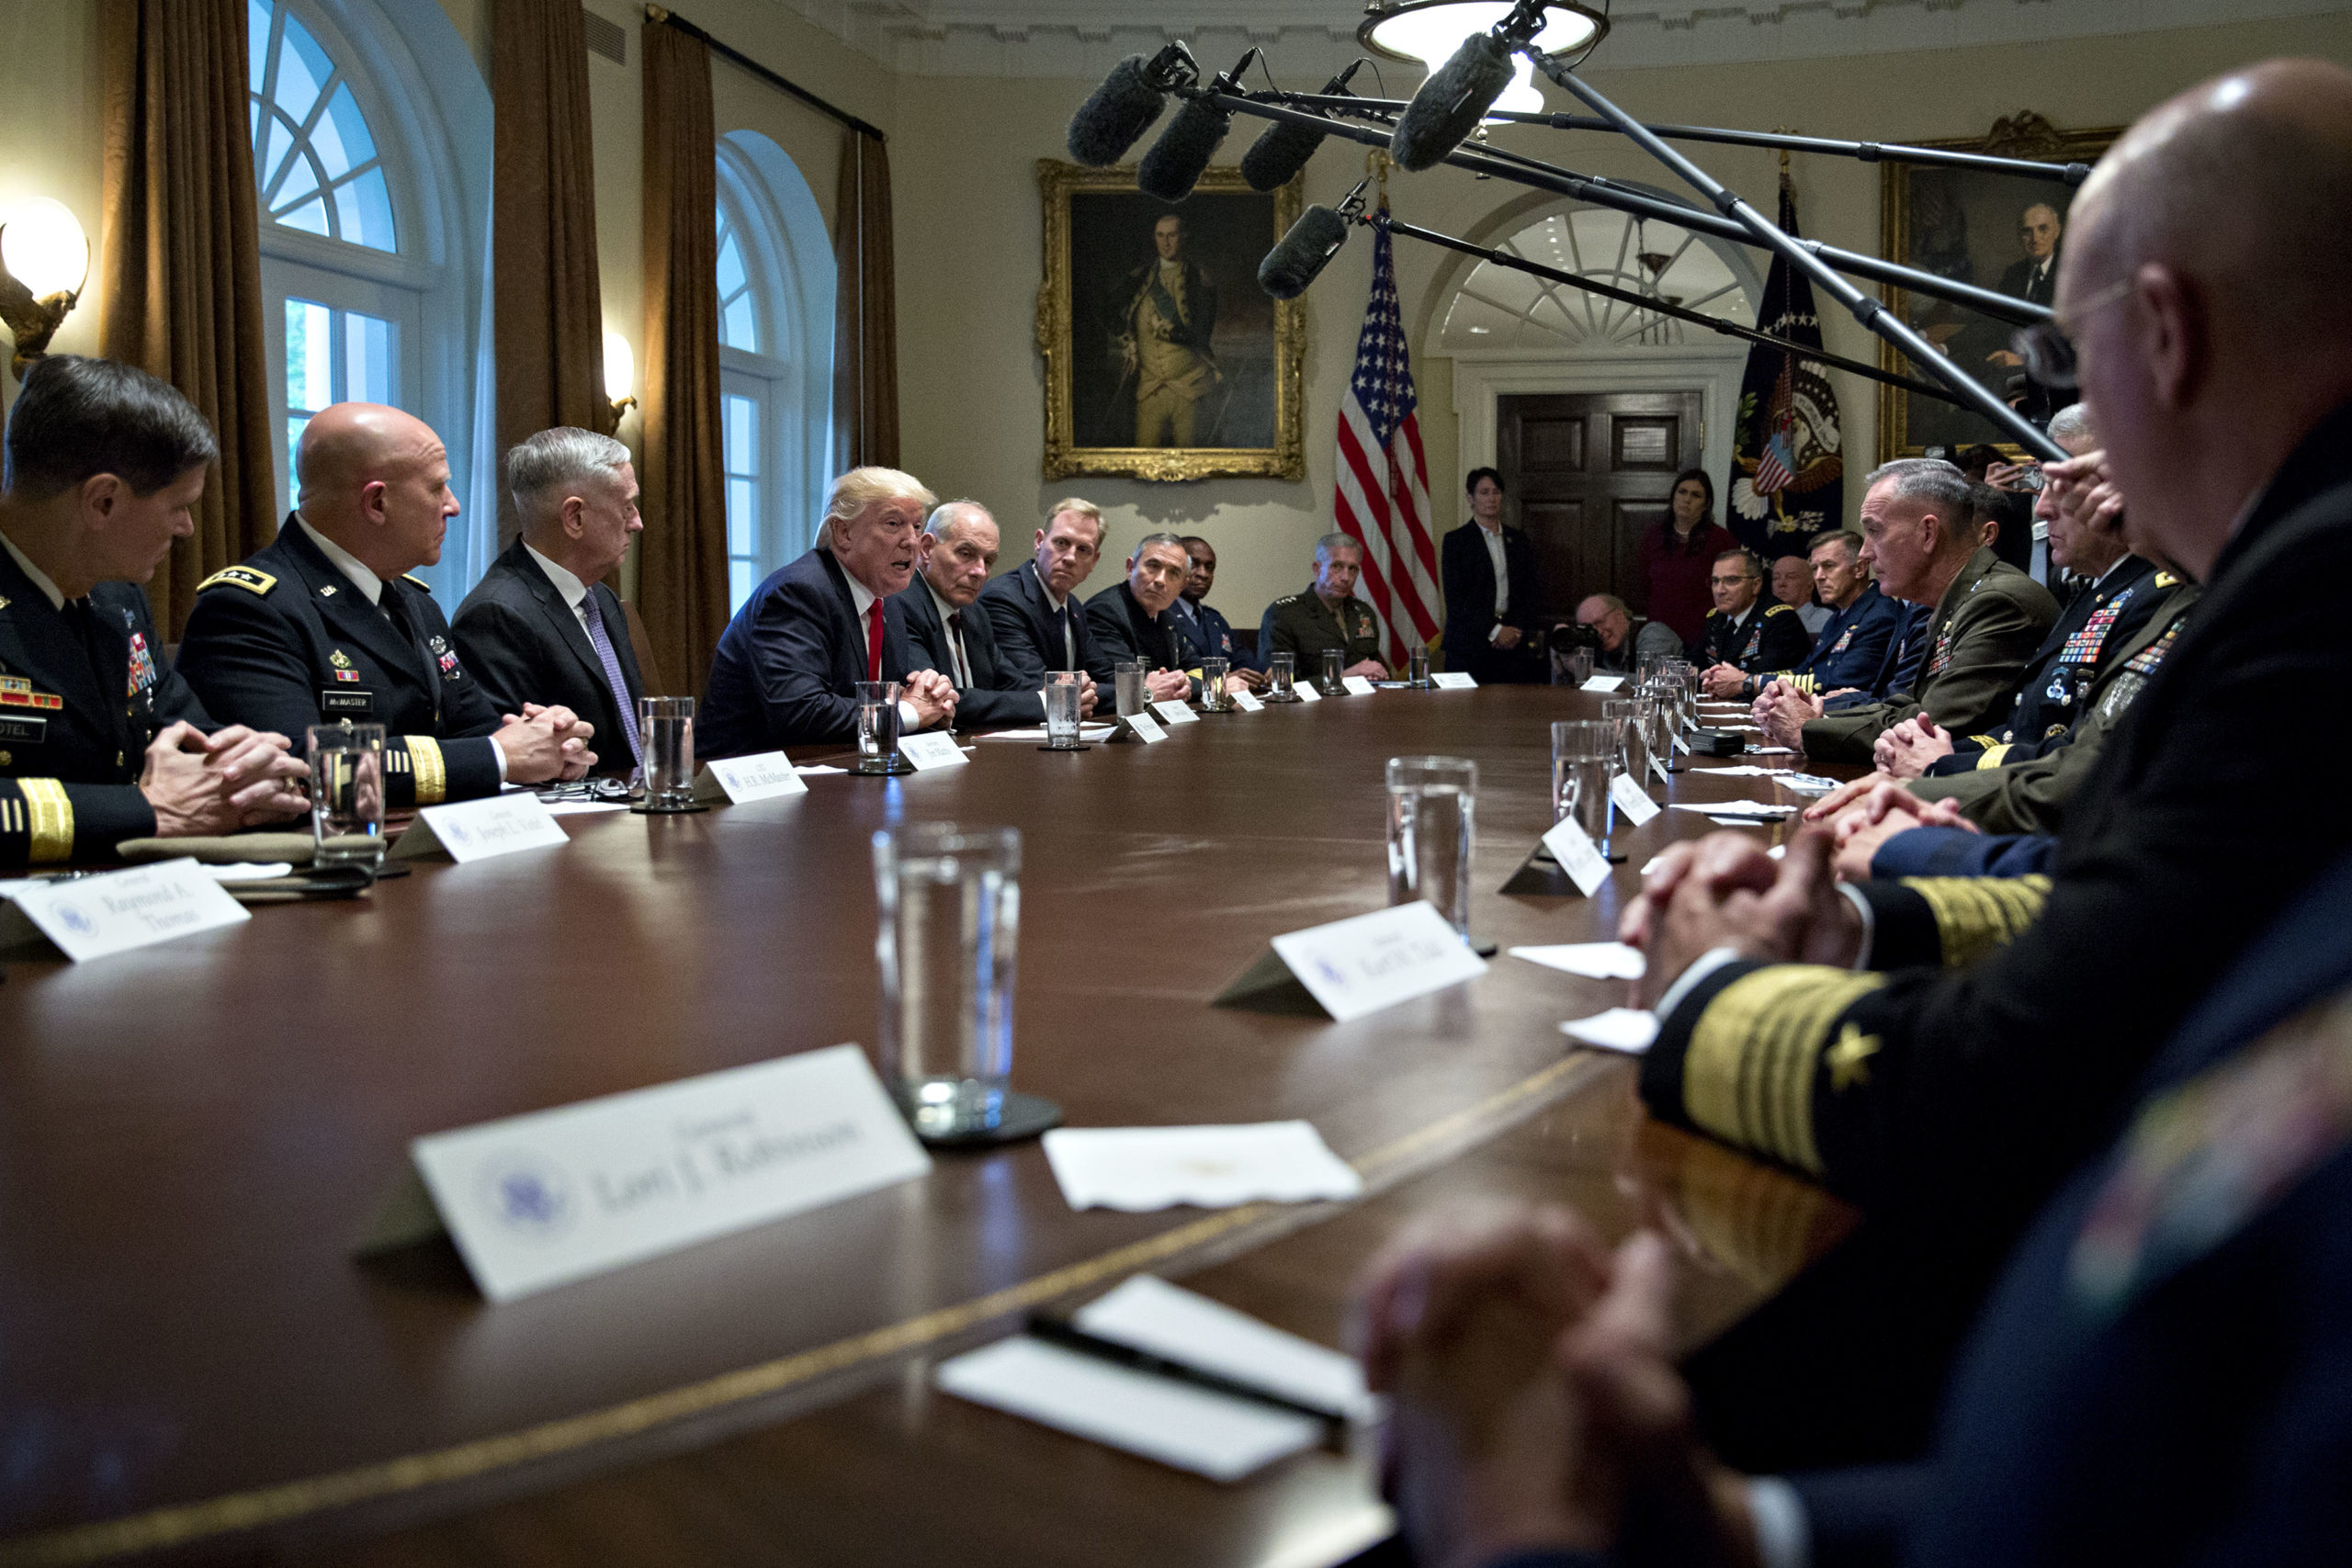 President Donald Trump discusses Afghanistan with senior military leaders in October 2017. (Andrew Harrer/Pool/Getty Images)